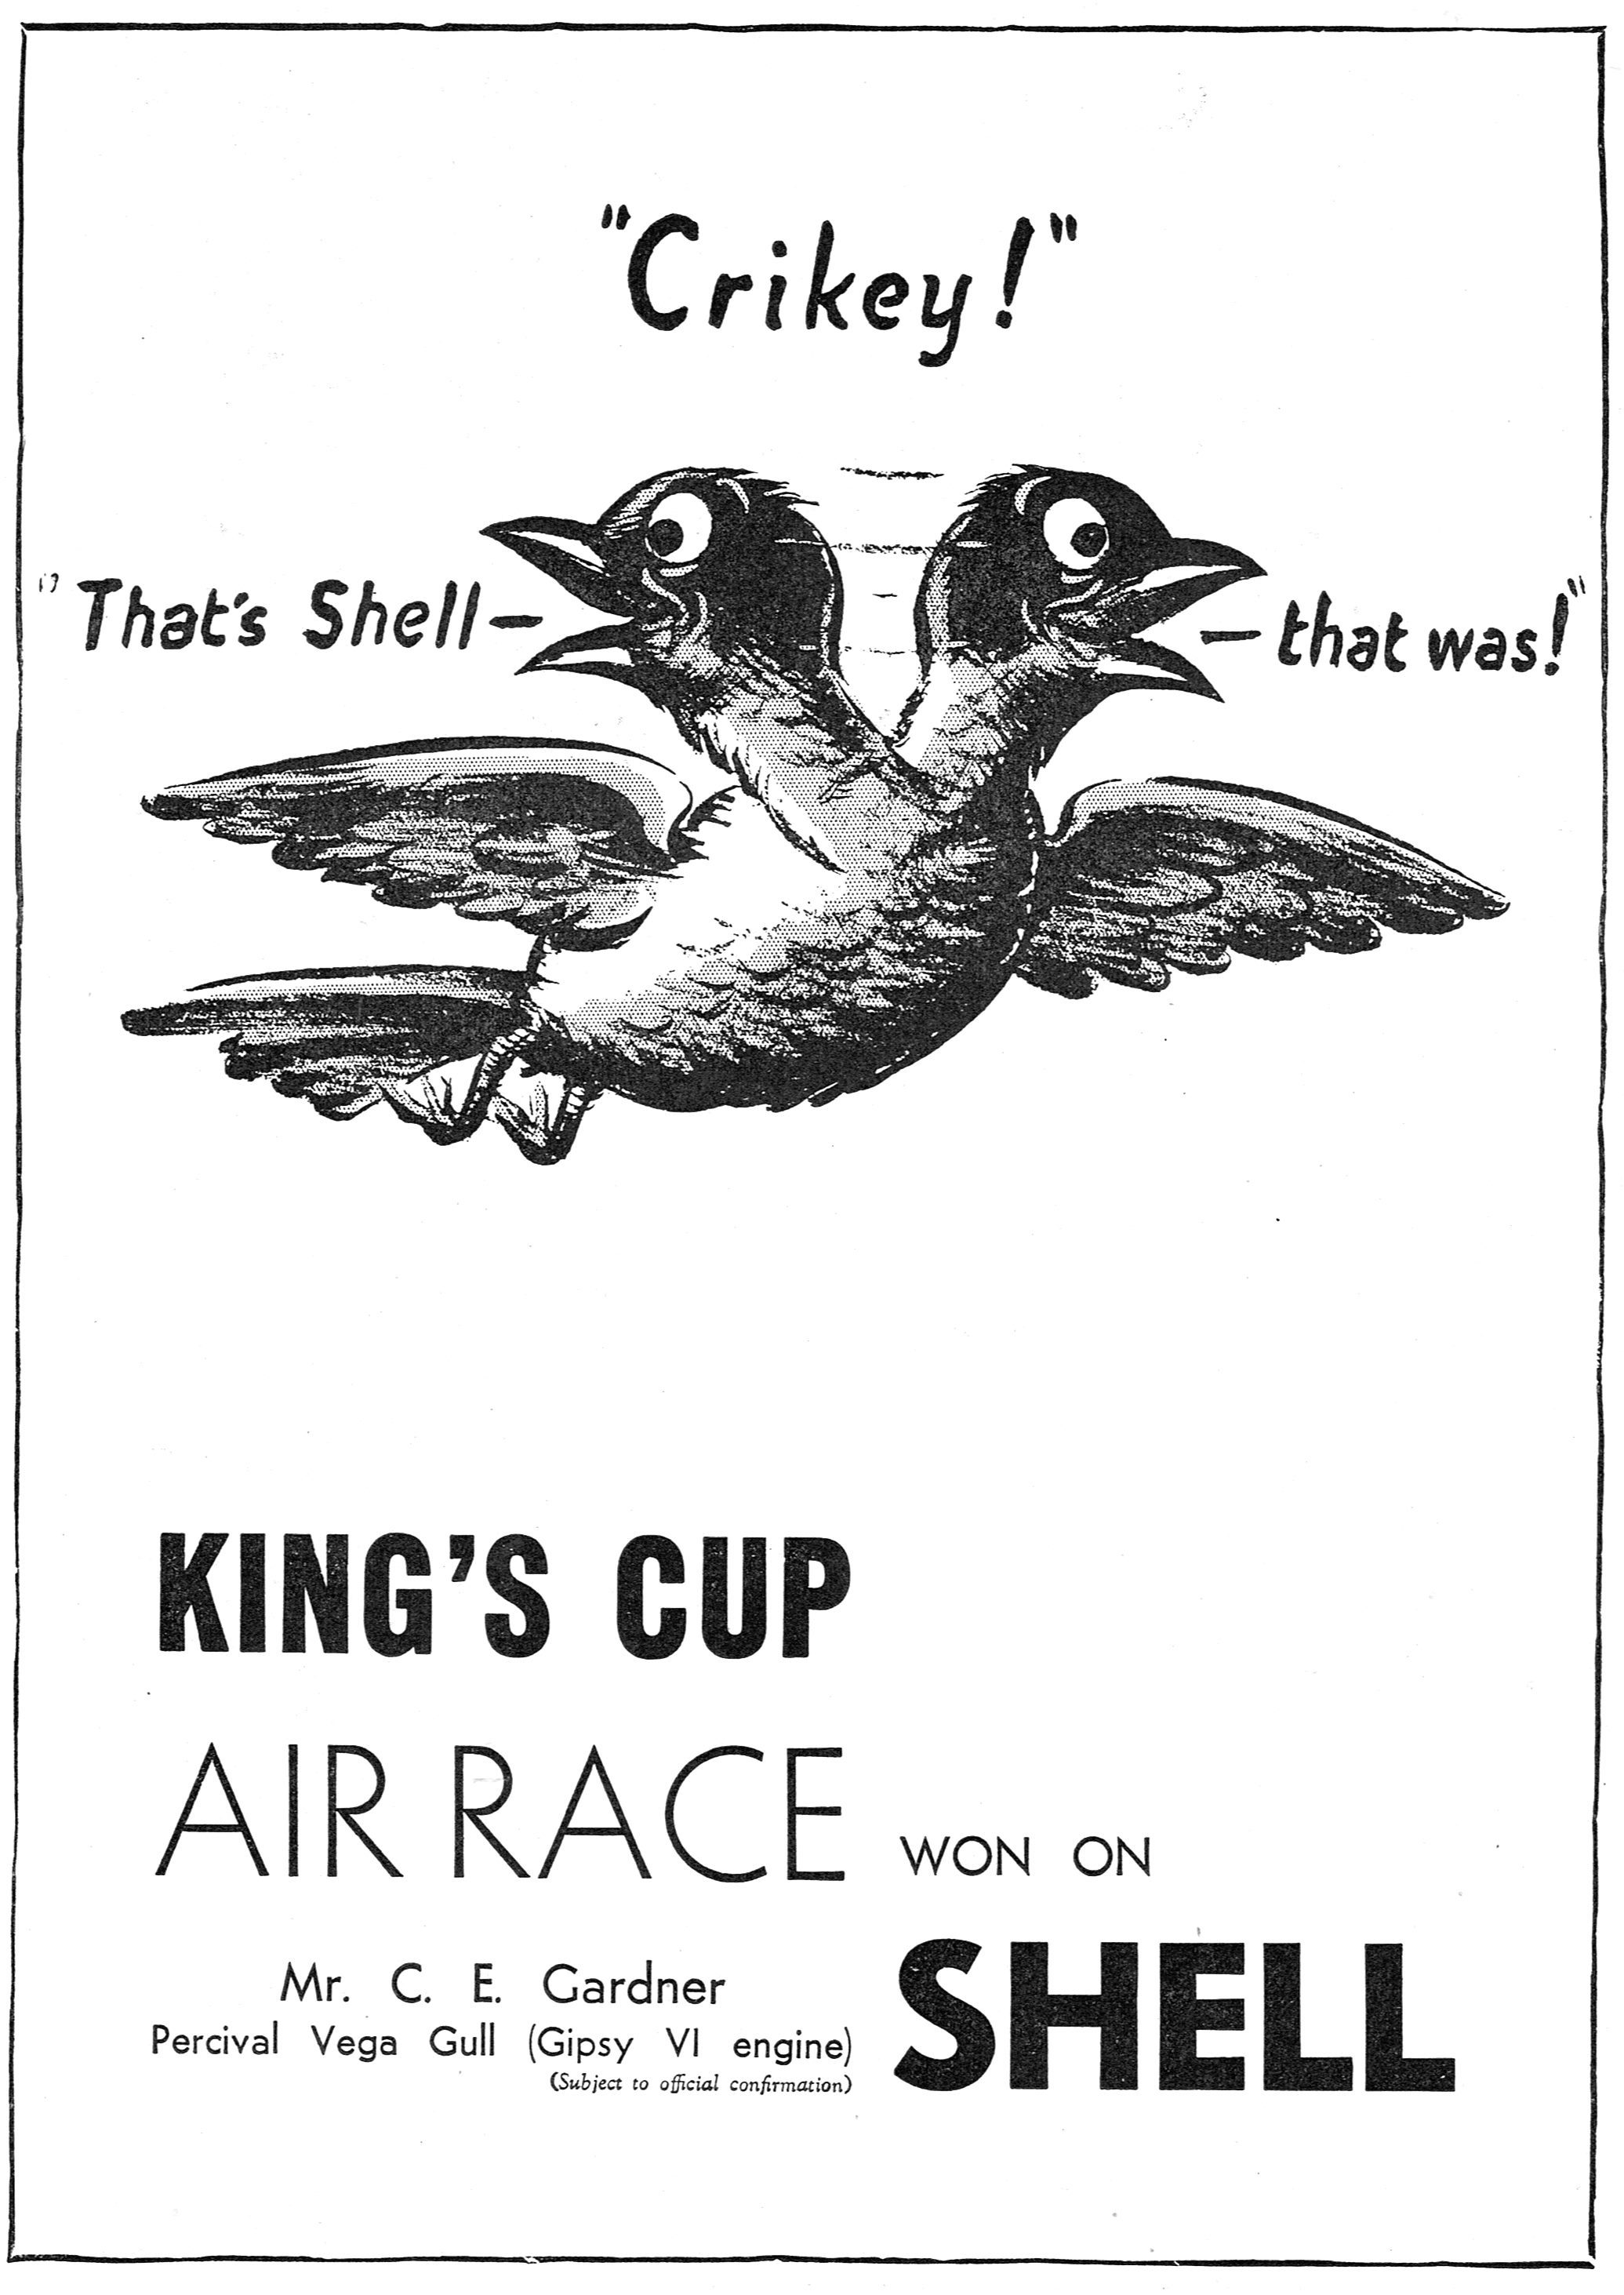 Poster of Crikey! King's Cup, 1936